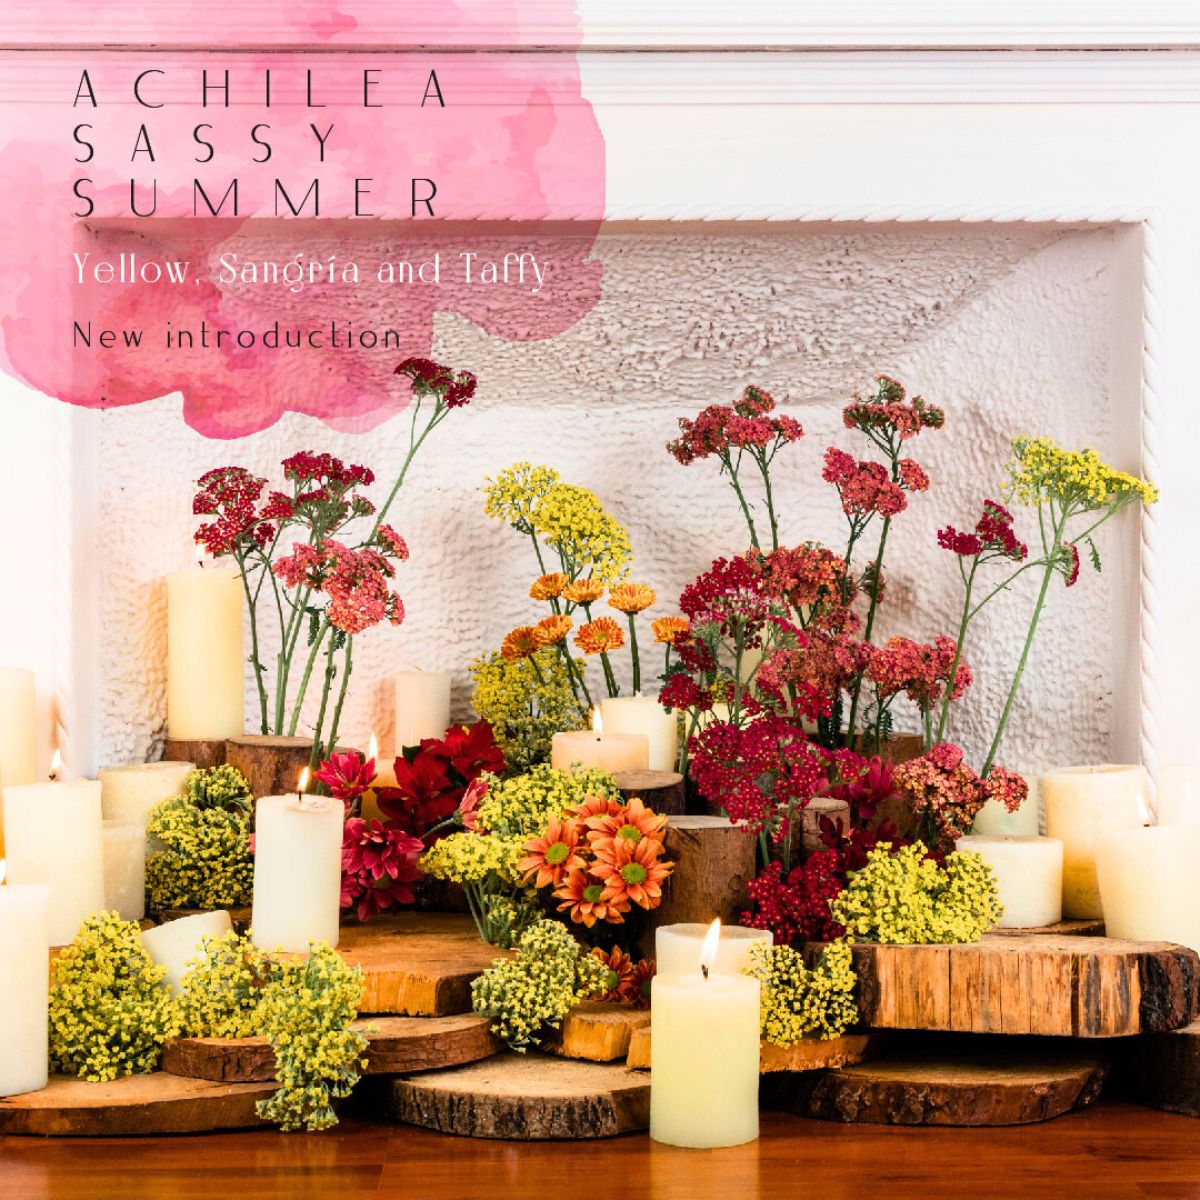 Achillea Sassy in Yellow Sangria and Taffy